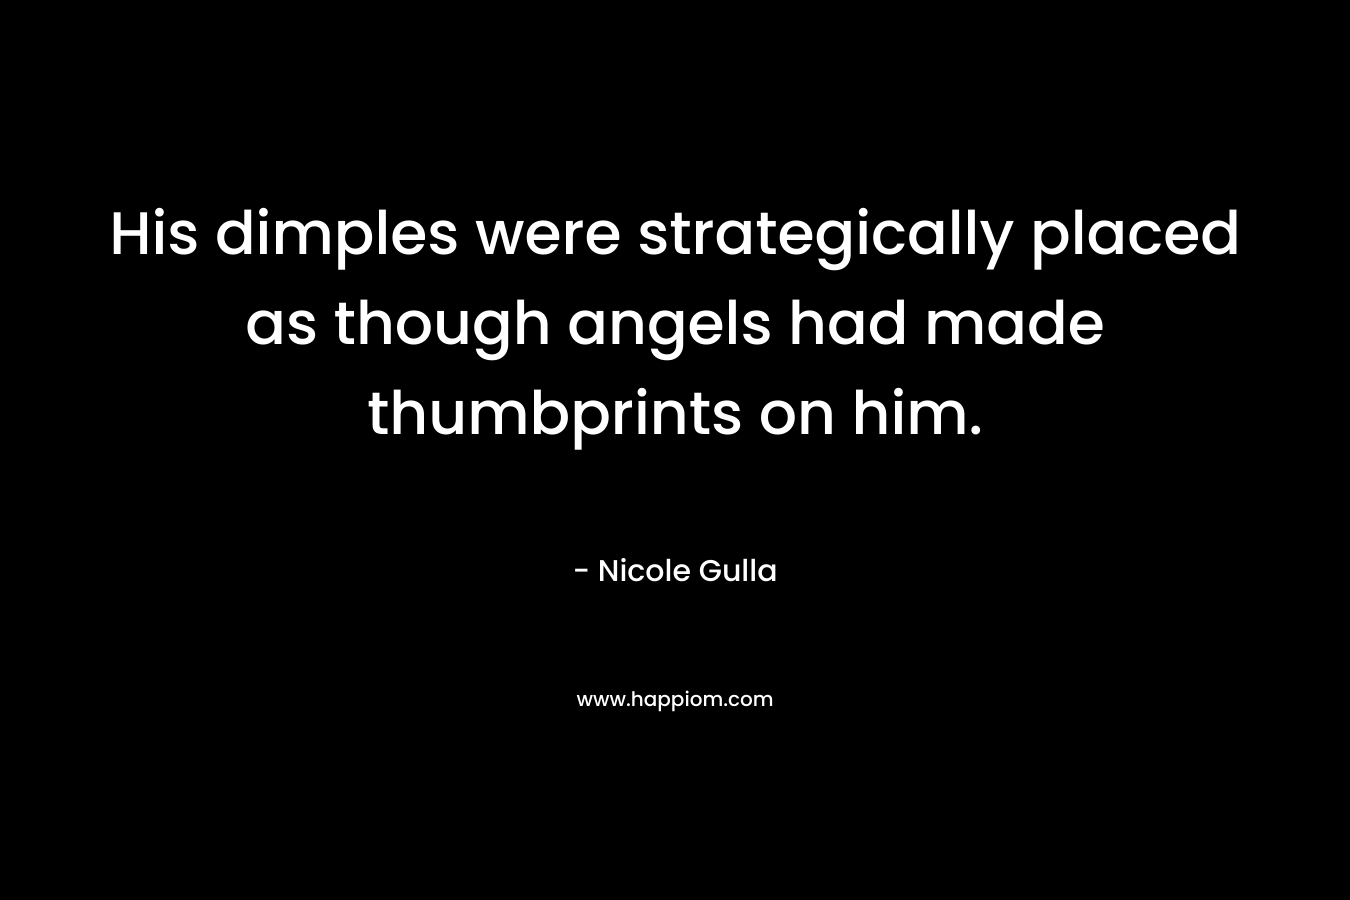 His dimples were strategically placed as though angels had made thumbprints on him. – Nicole Gulla